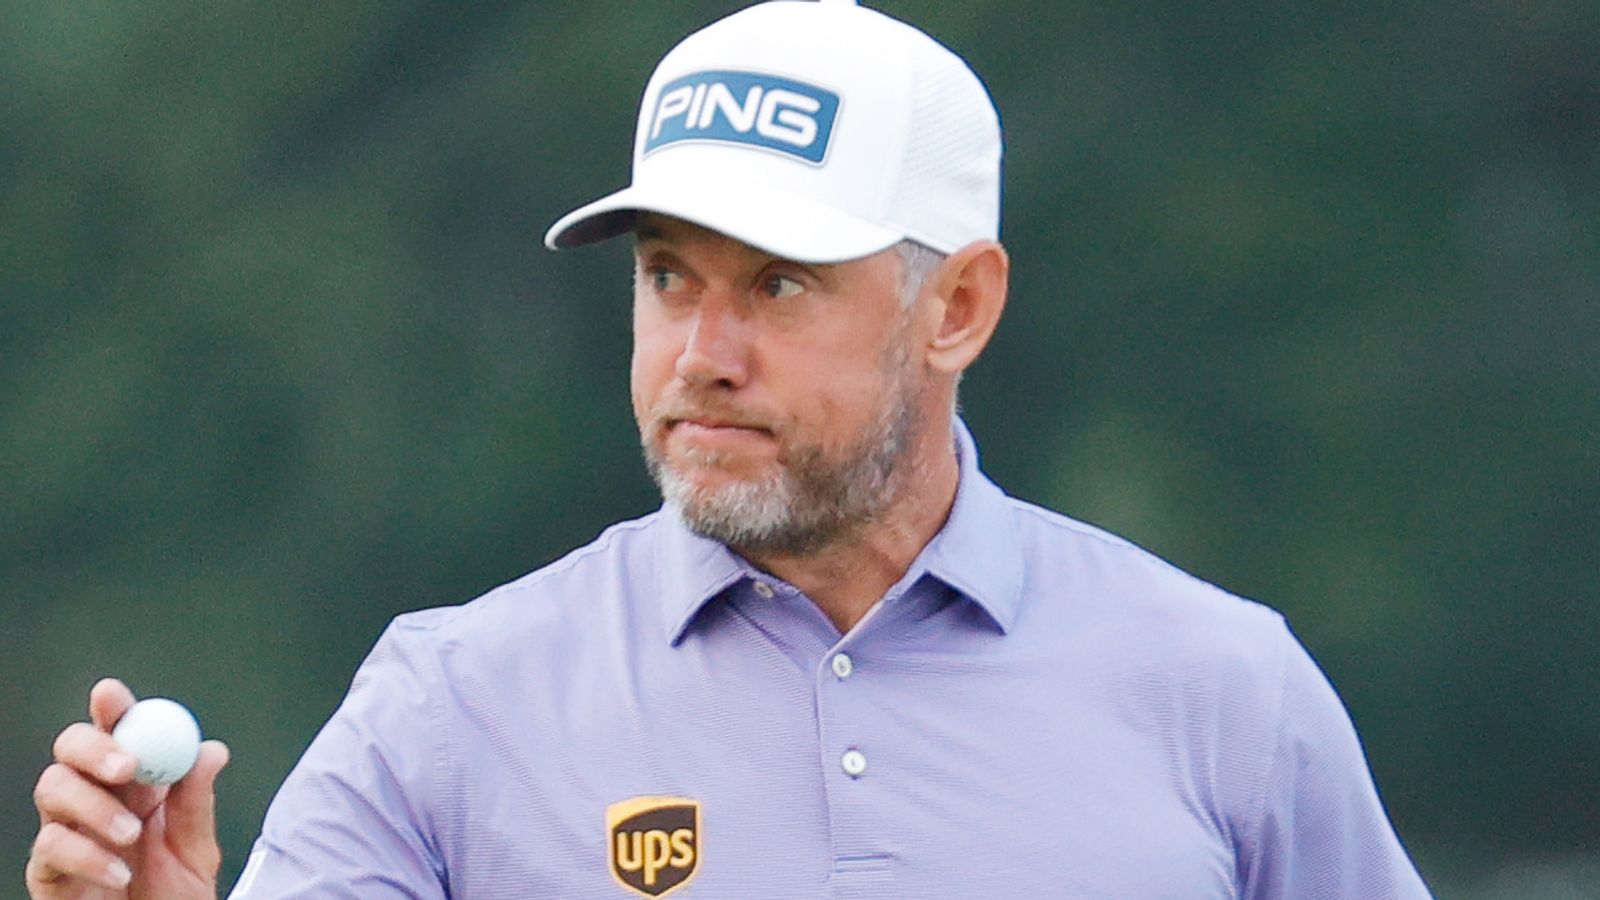 Us Open Lee Westwood Looking To Return To Form And Challenge For Major